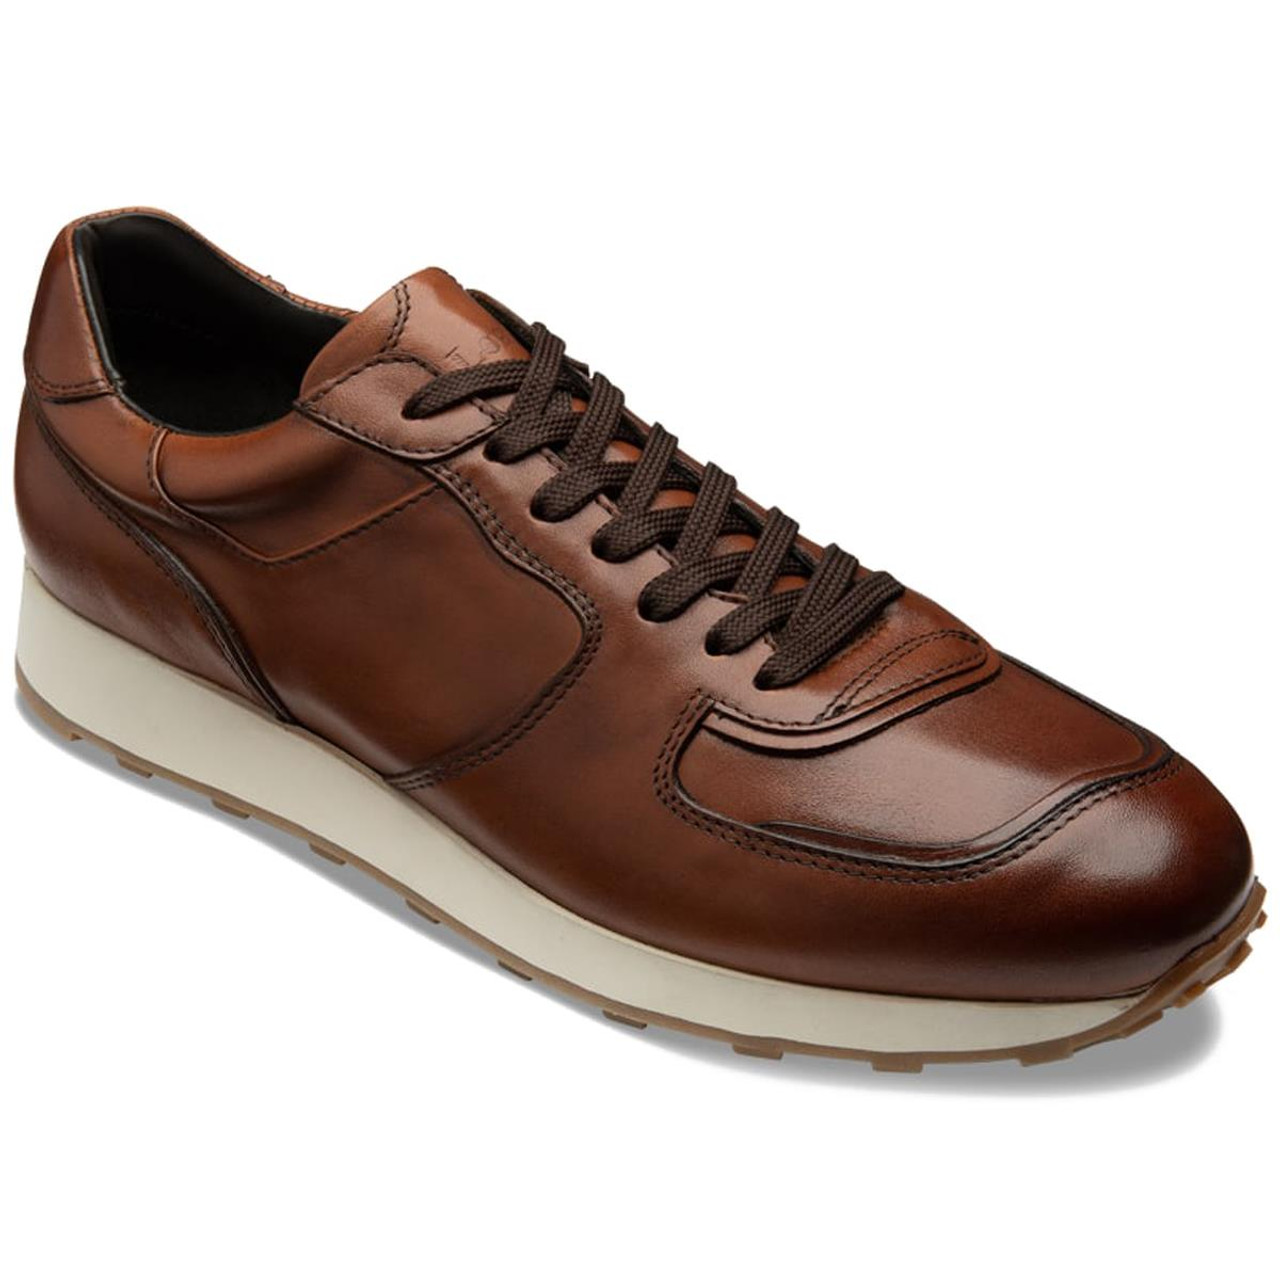 What does the F fitting offer in Loake trainers?